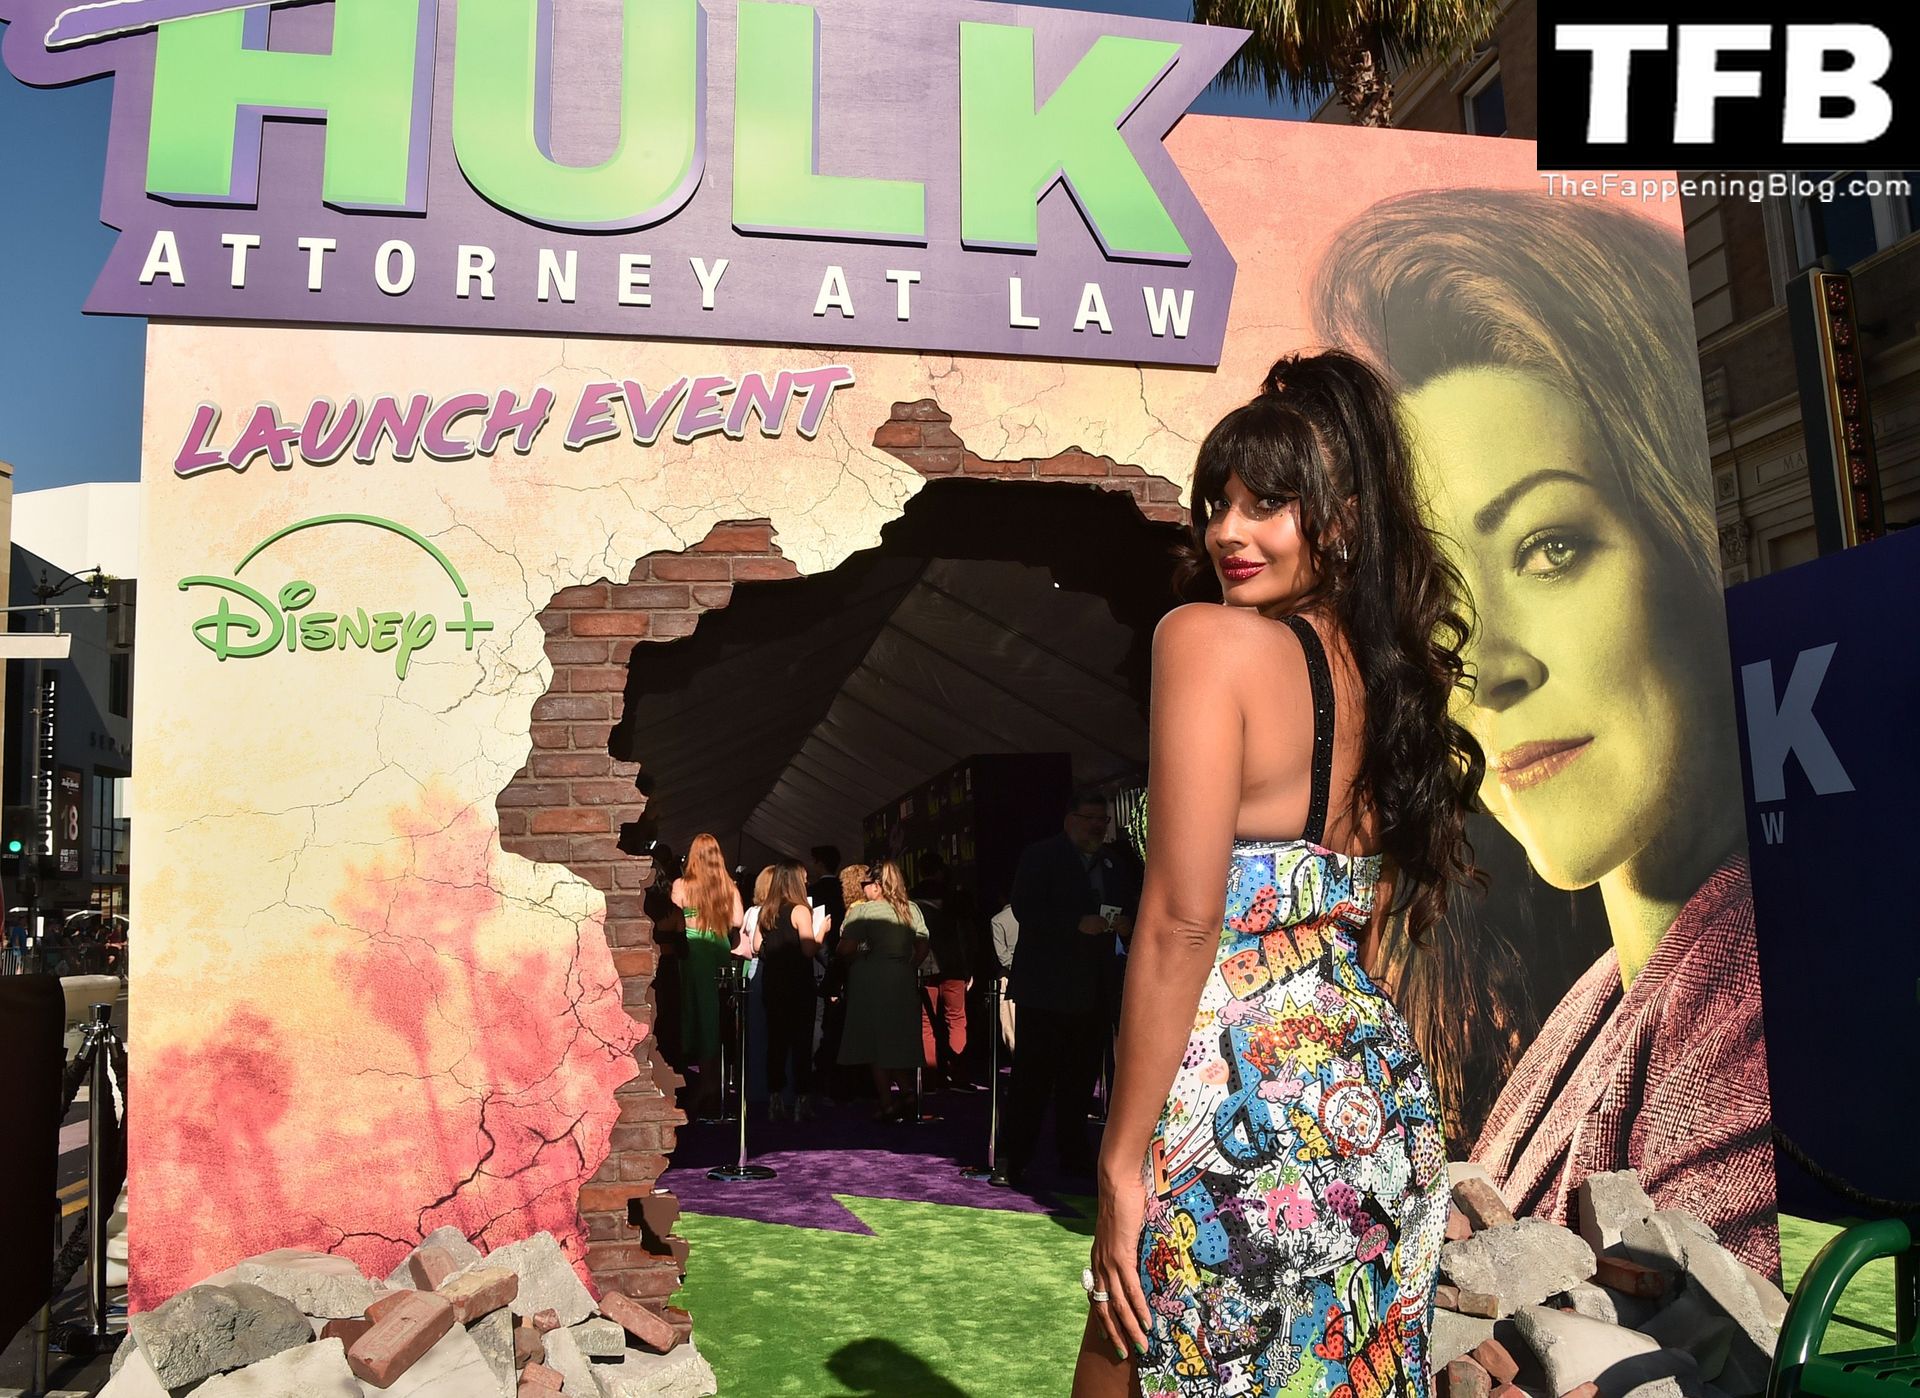 Jameela Jamil Sexy The Fappening Blog 32 - Jameela Jamil Flaunts Her Big Tits at the Premiere of Disney+’s “She Hulk: Attorney at Law” in LA (53 Photos)